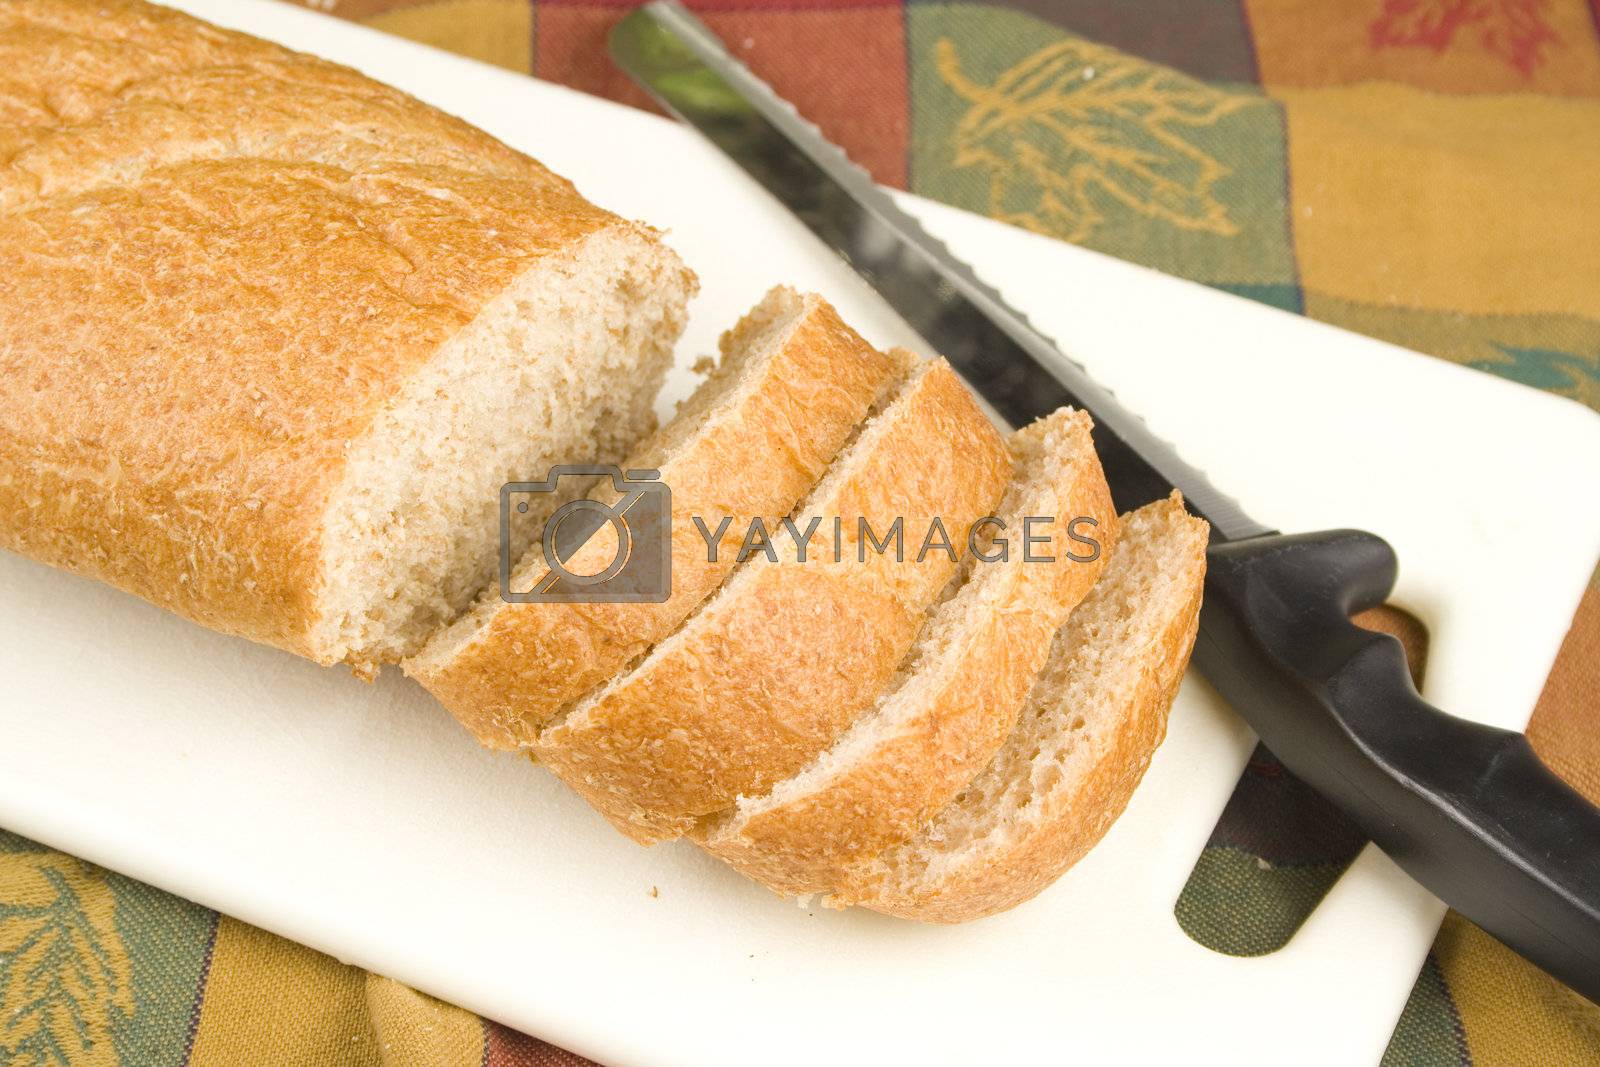 Royalty free image of Breads by evok20